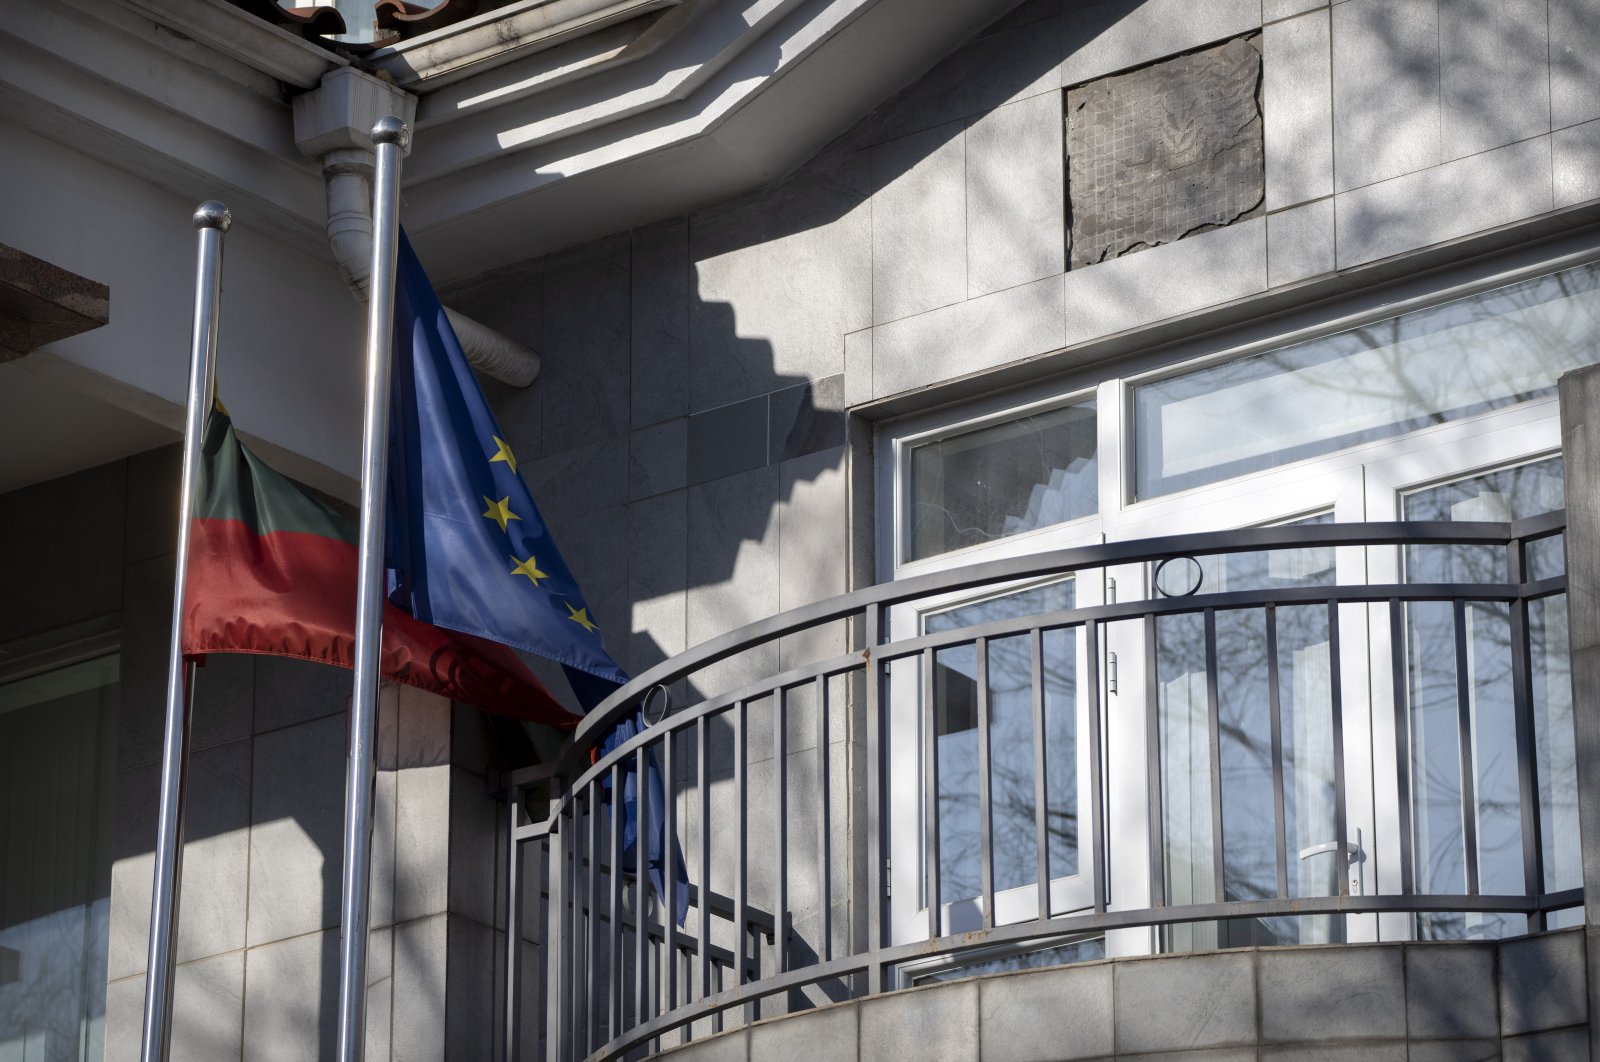 Lithuanian and European Union flags fly outside the Lithuanian Embassy in Beijing, China, Dec. 16, 2021. (AP Photo)